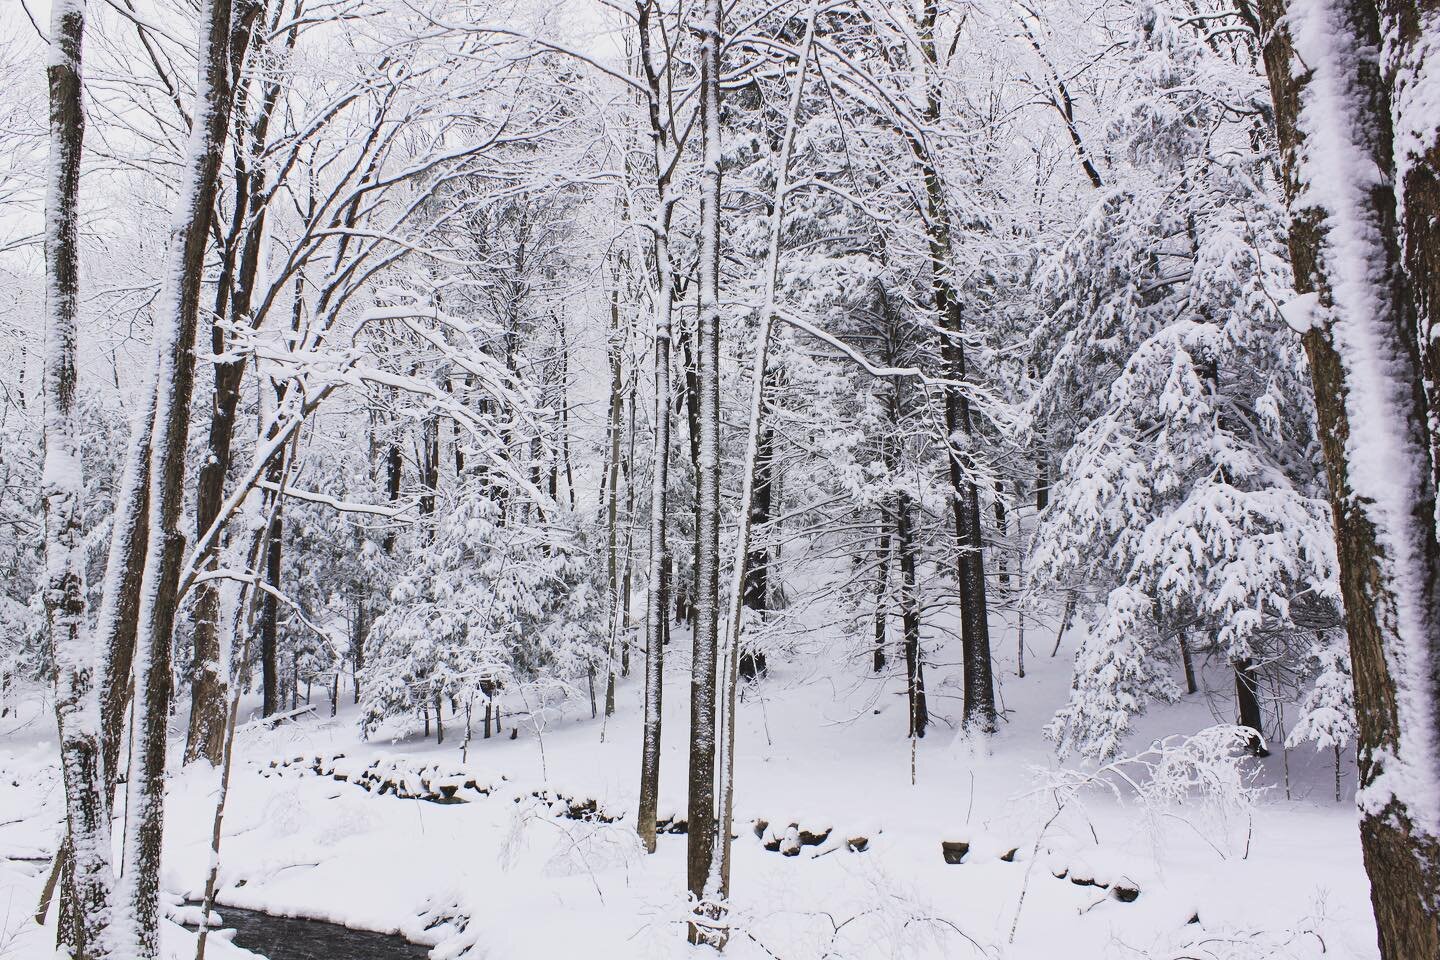 ❄️ Finally a snow day here in Pound Ridge! ❄️ A reminder to always exercise caution if you do plan to get outside and enjoy our winter wonderland. ☃️🌨️